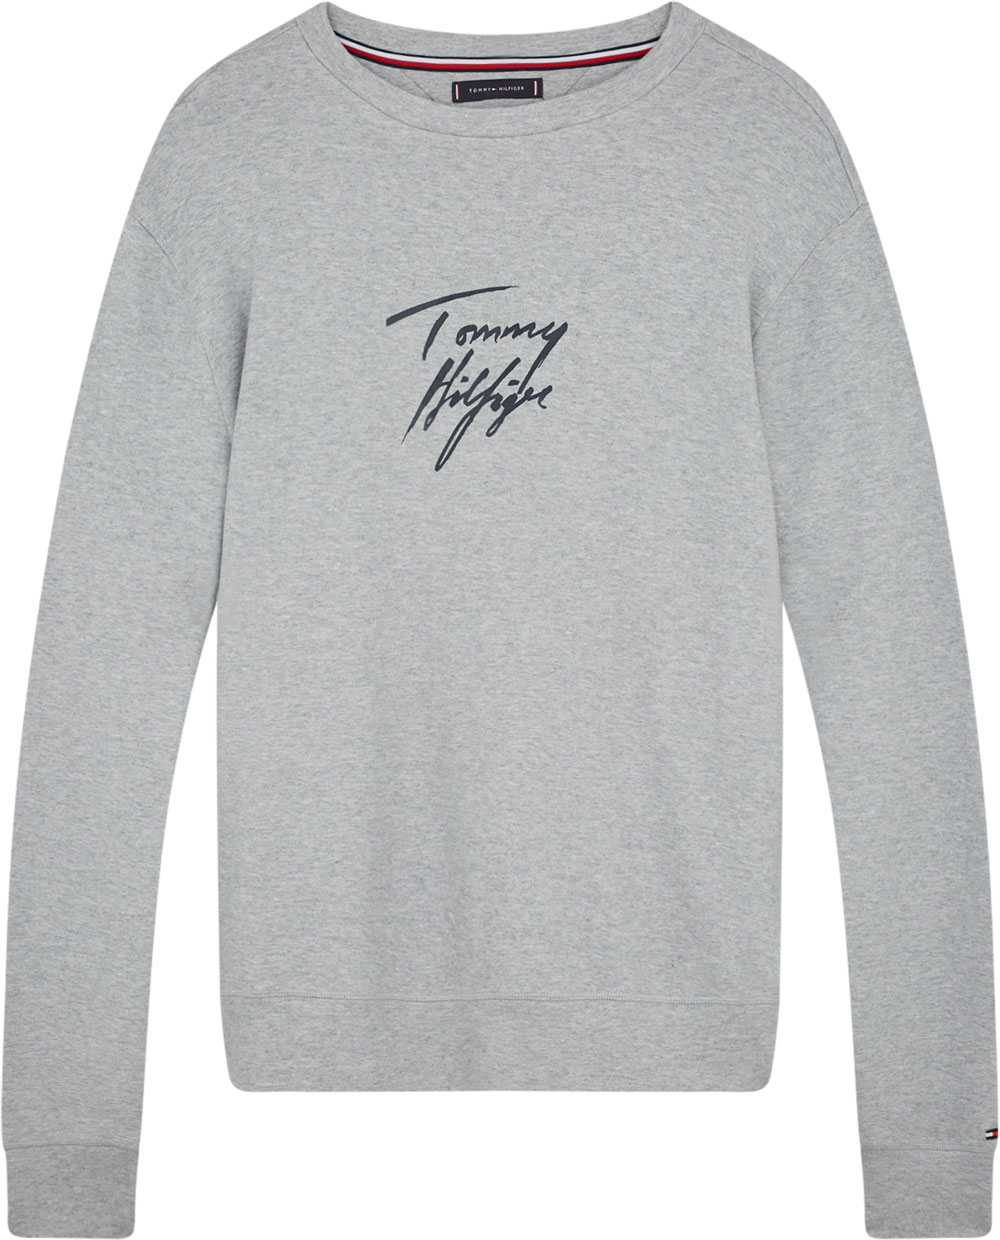 Tommy Hilfiger TRACK TOP LWK | sportisimo.cz